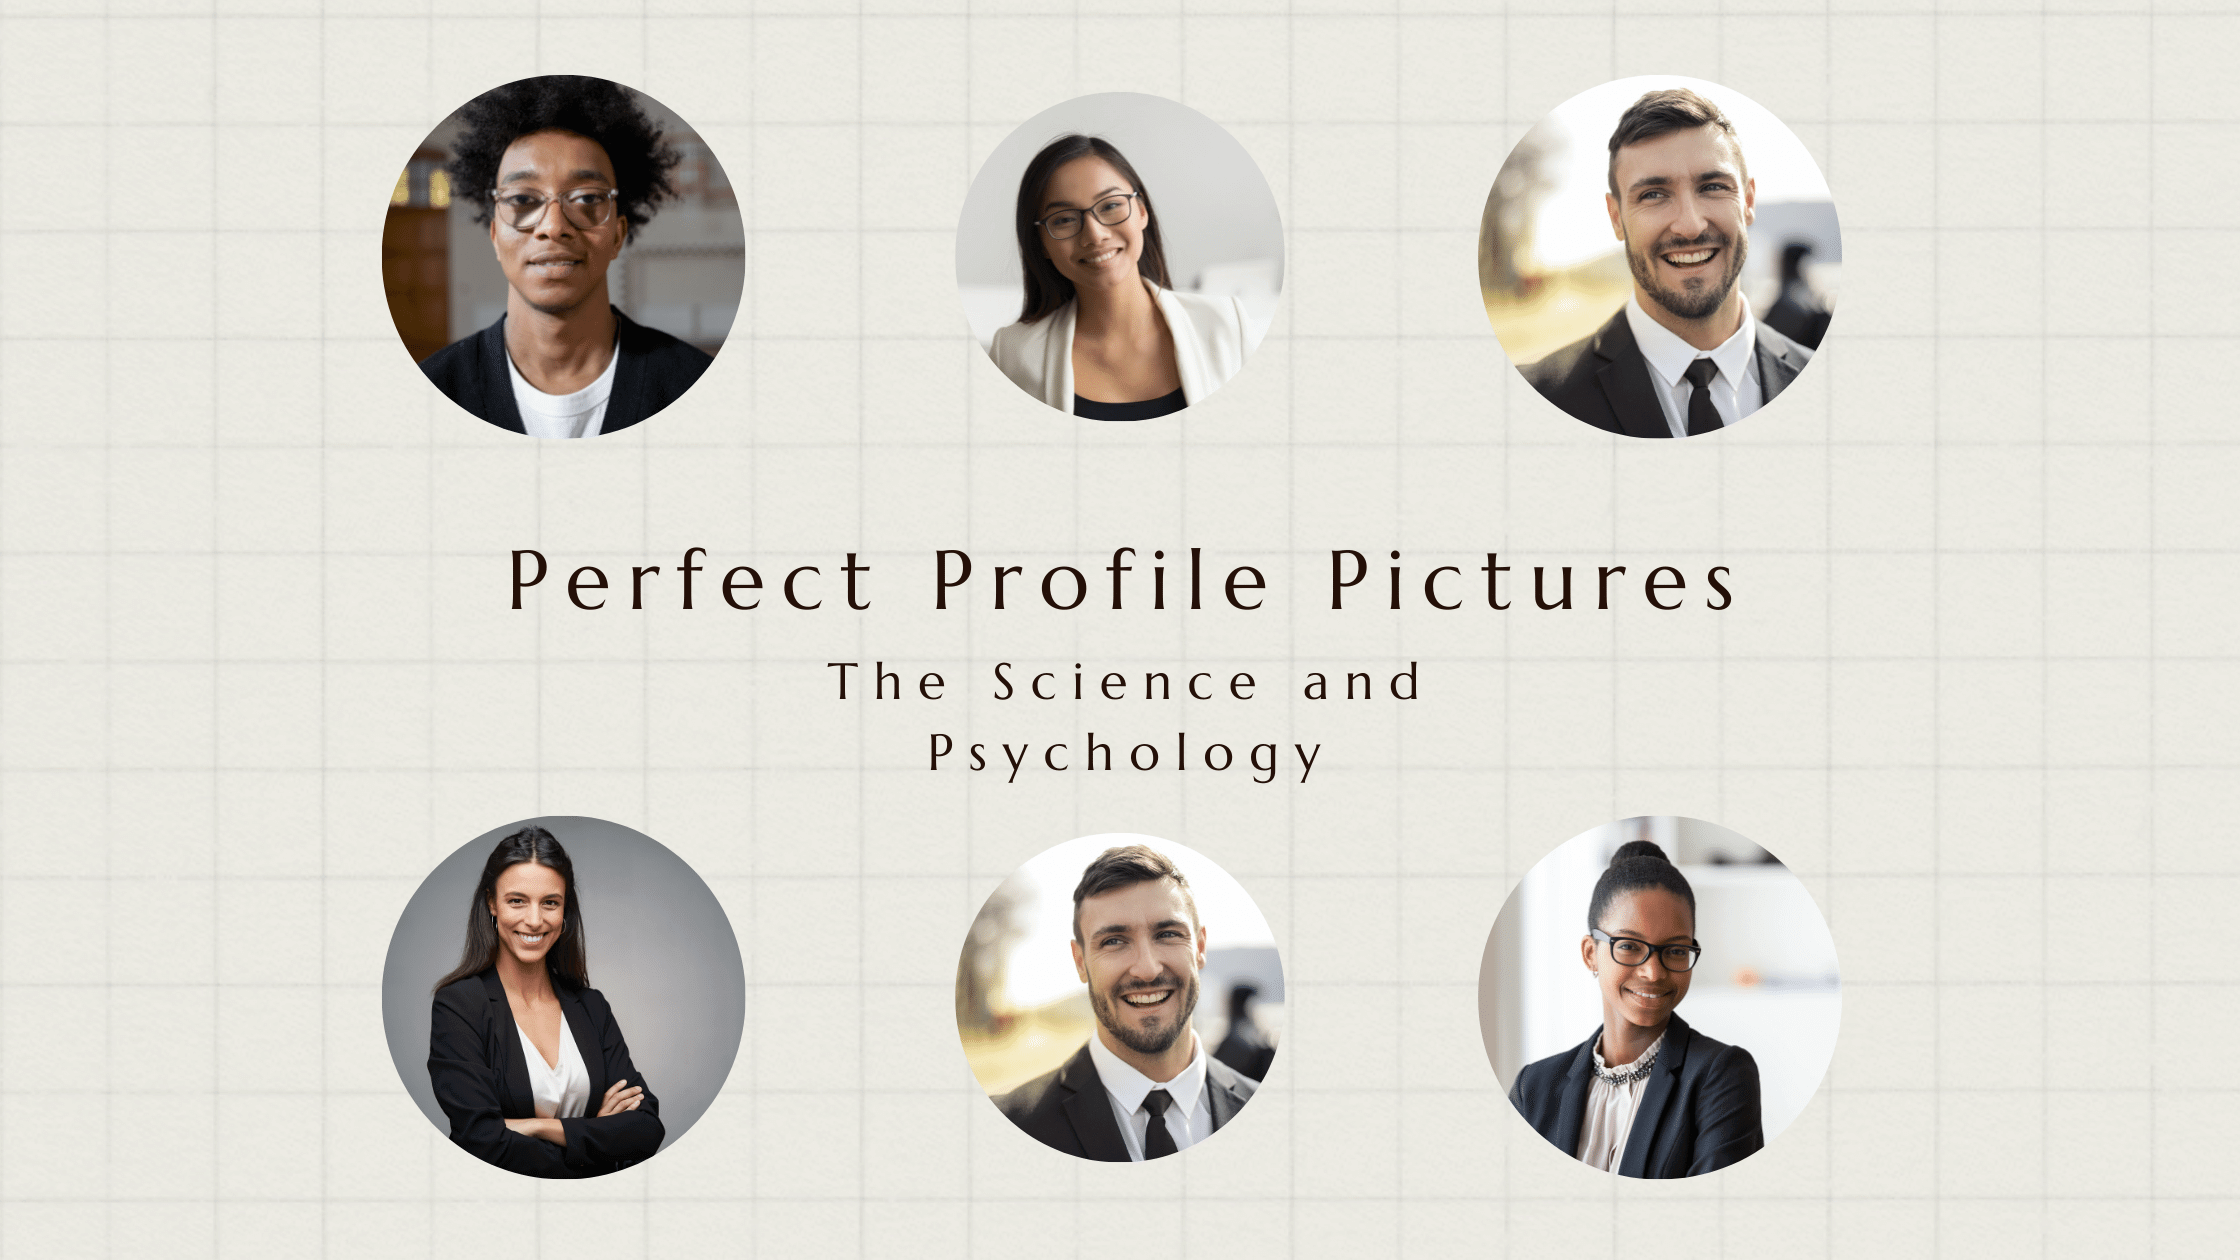 The Surprising Science Behind Your BEST LinkedIn Profile Picture